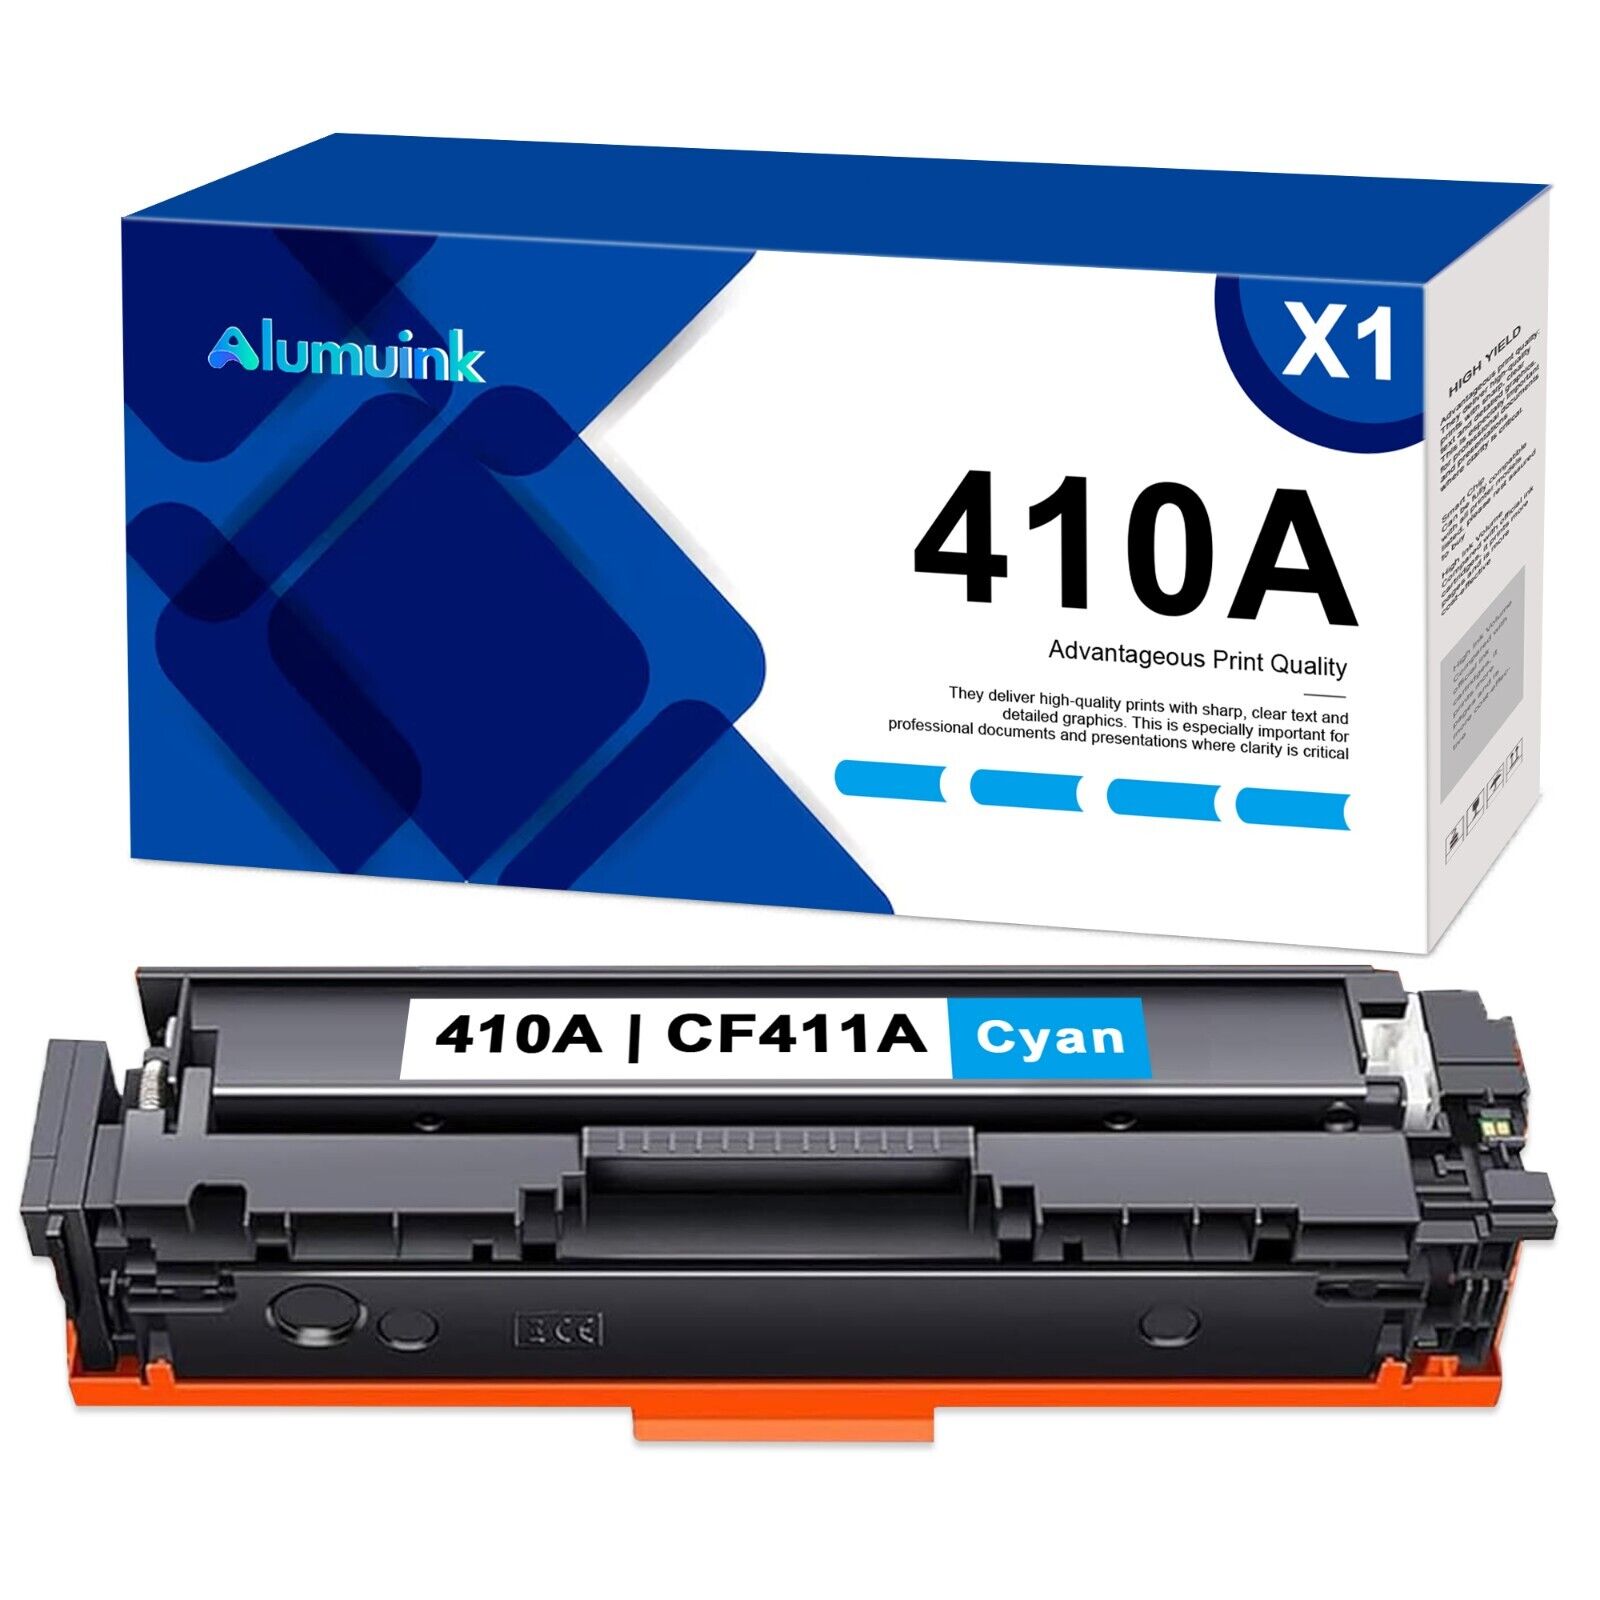 1PK 410A Cyan Toner Cartridge Replacement for HP 410A CF411A Color Pro M452dn